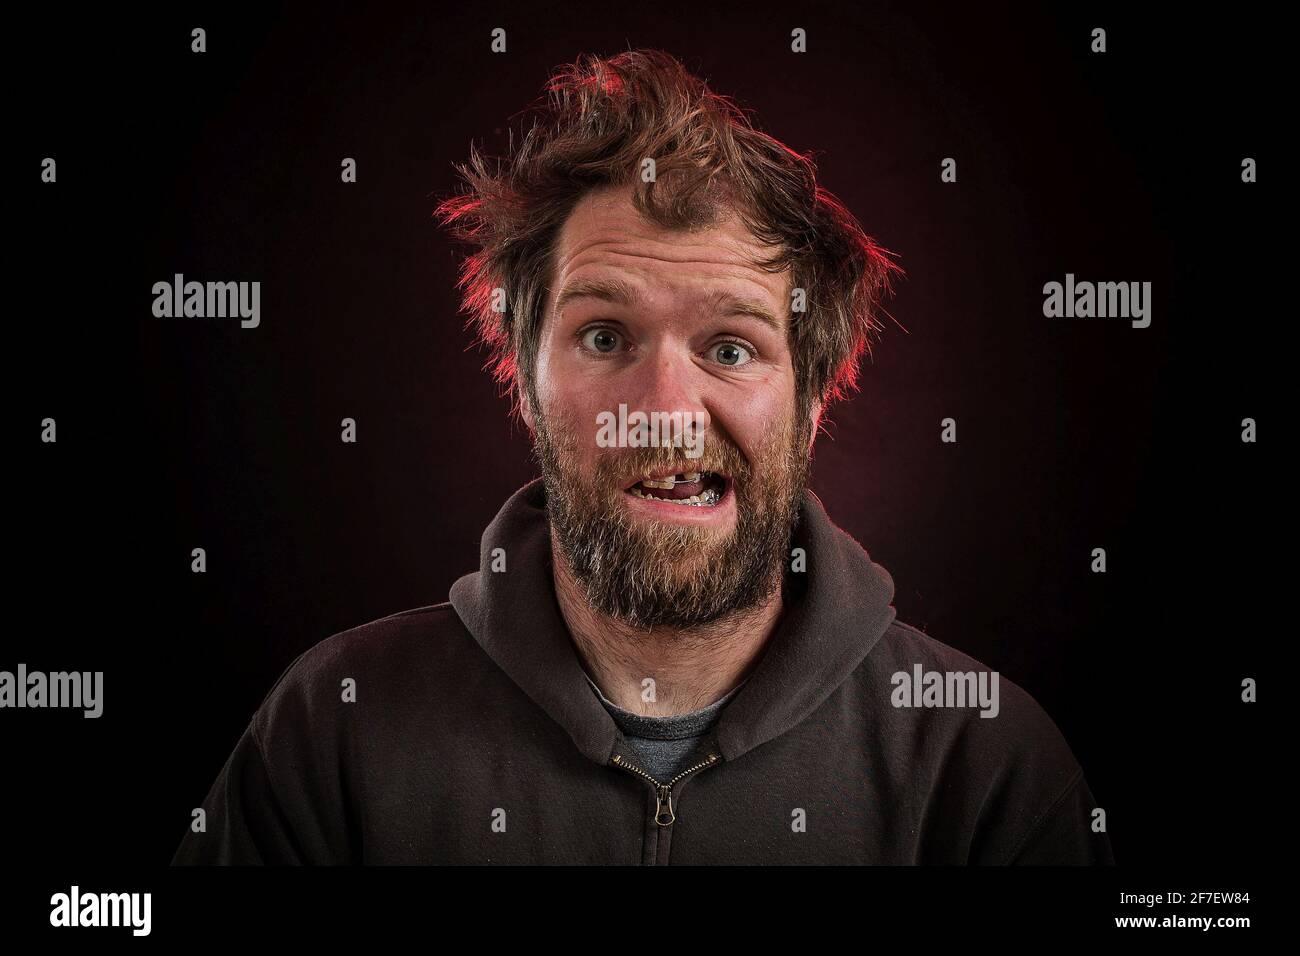 A goofy man with a beard, dental braces on a dark red lit background with brown hoodie or sweater and electrified hair. Stock Photo